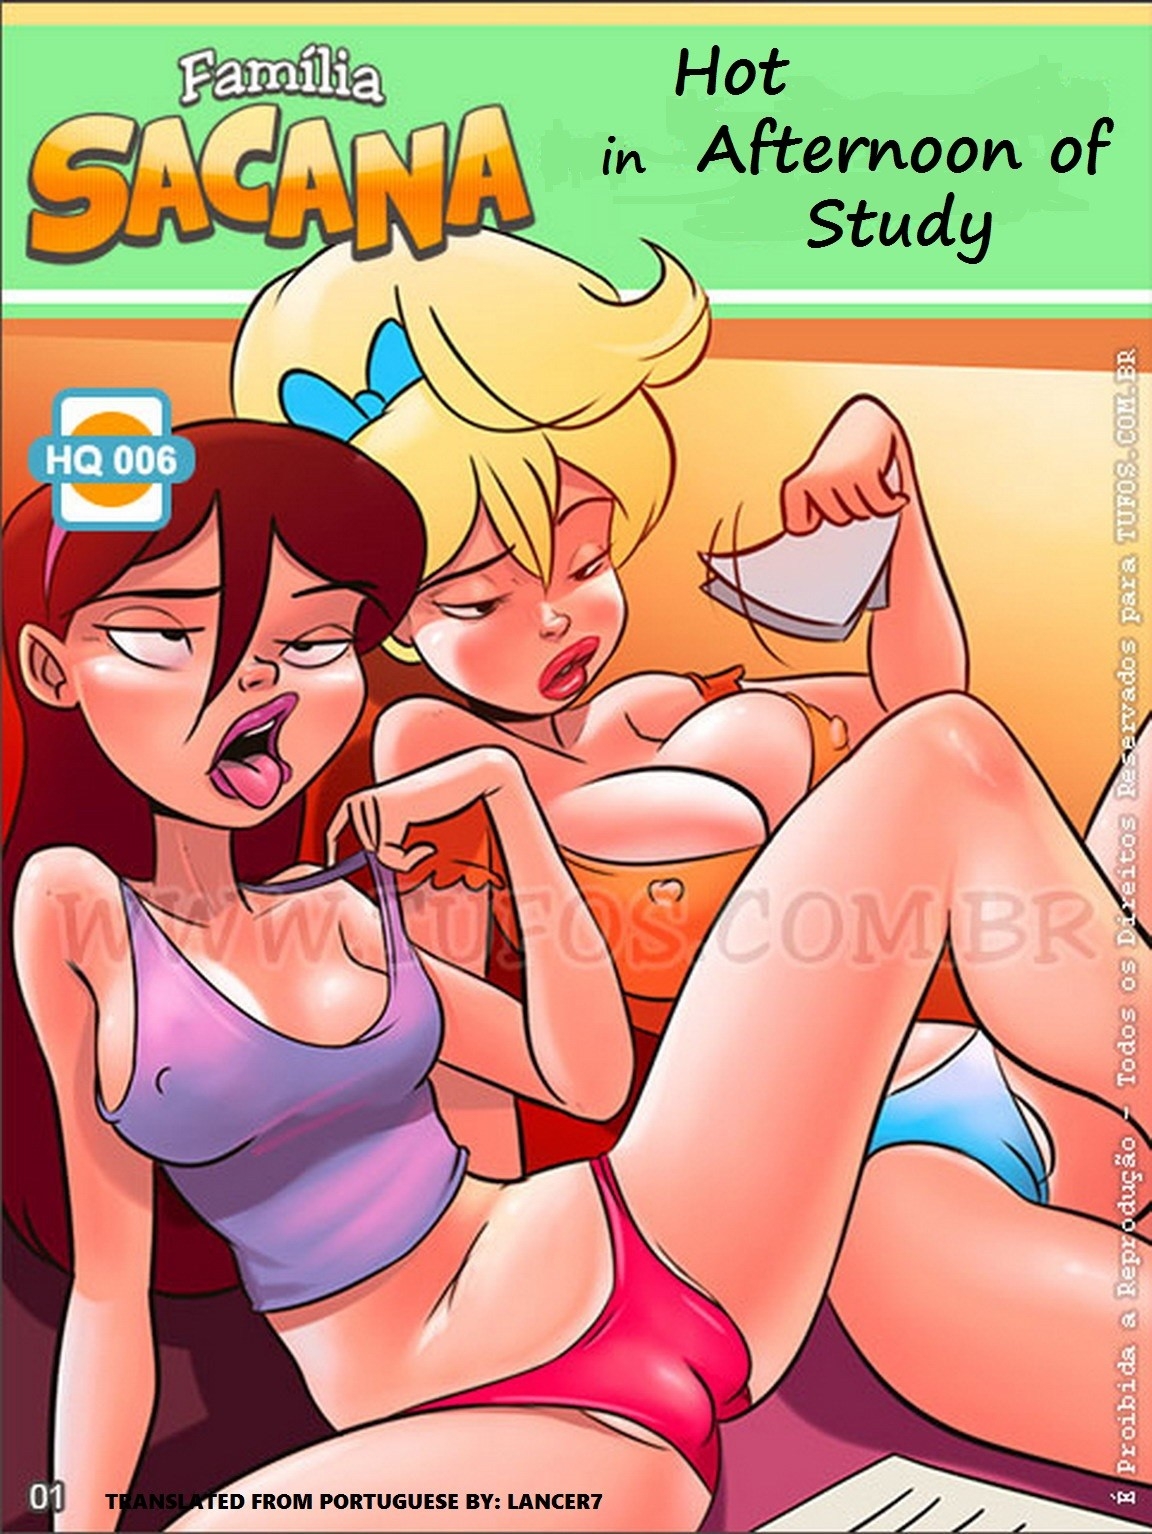 Family Sacana #6 (English Version) - Hot Afternoon of Study